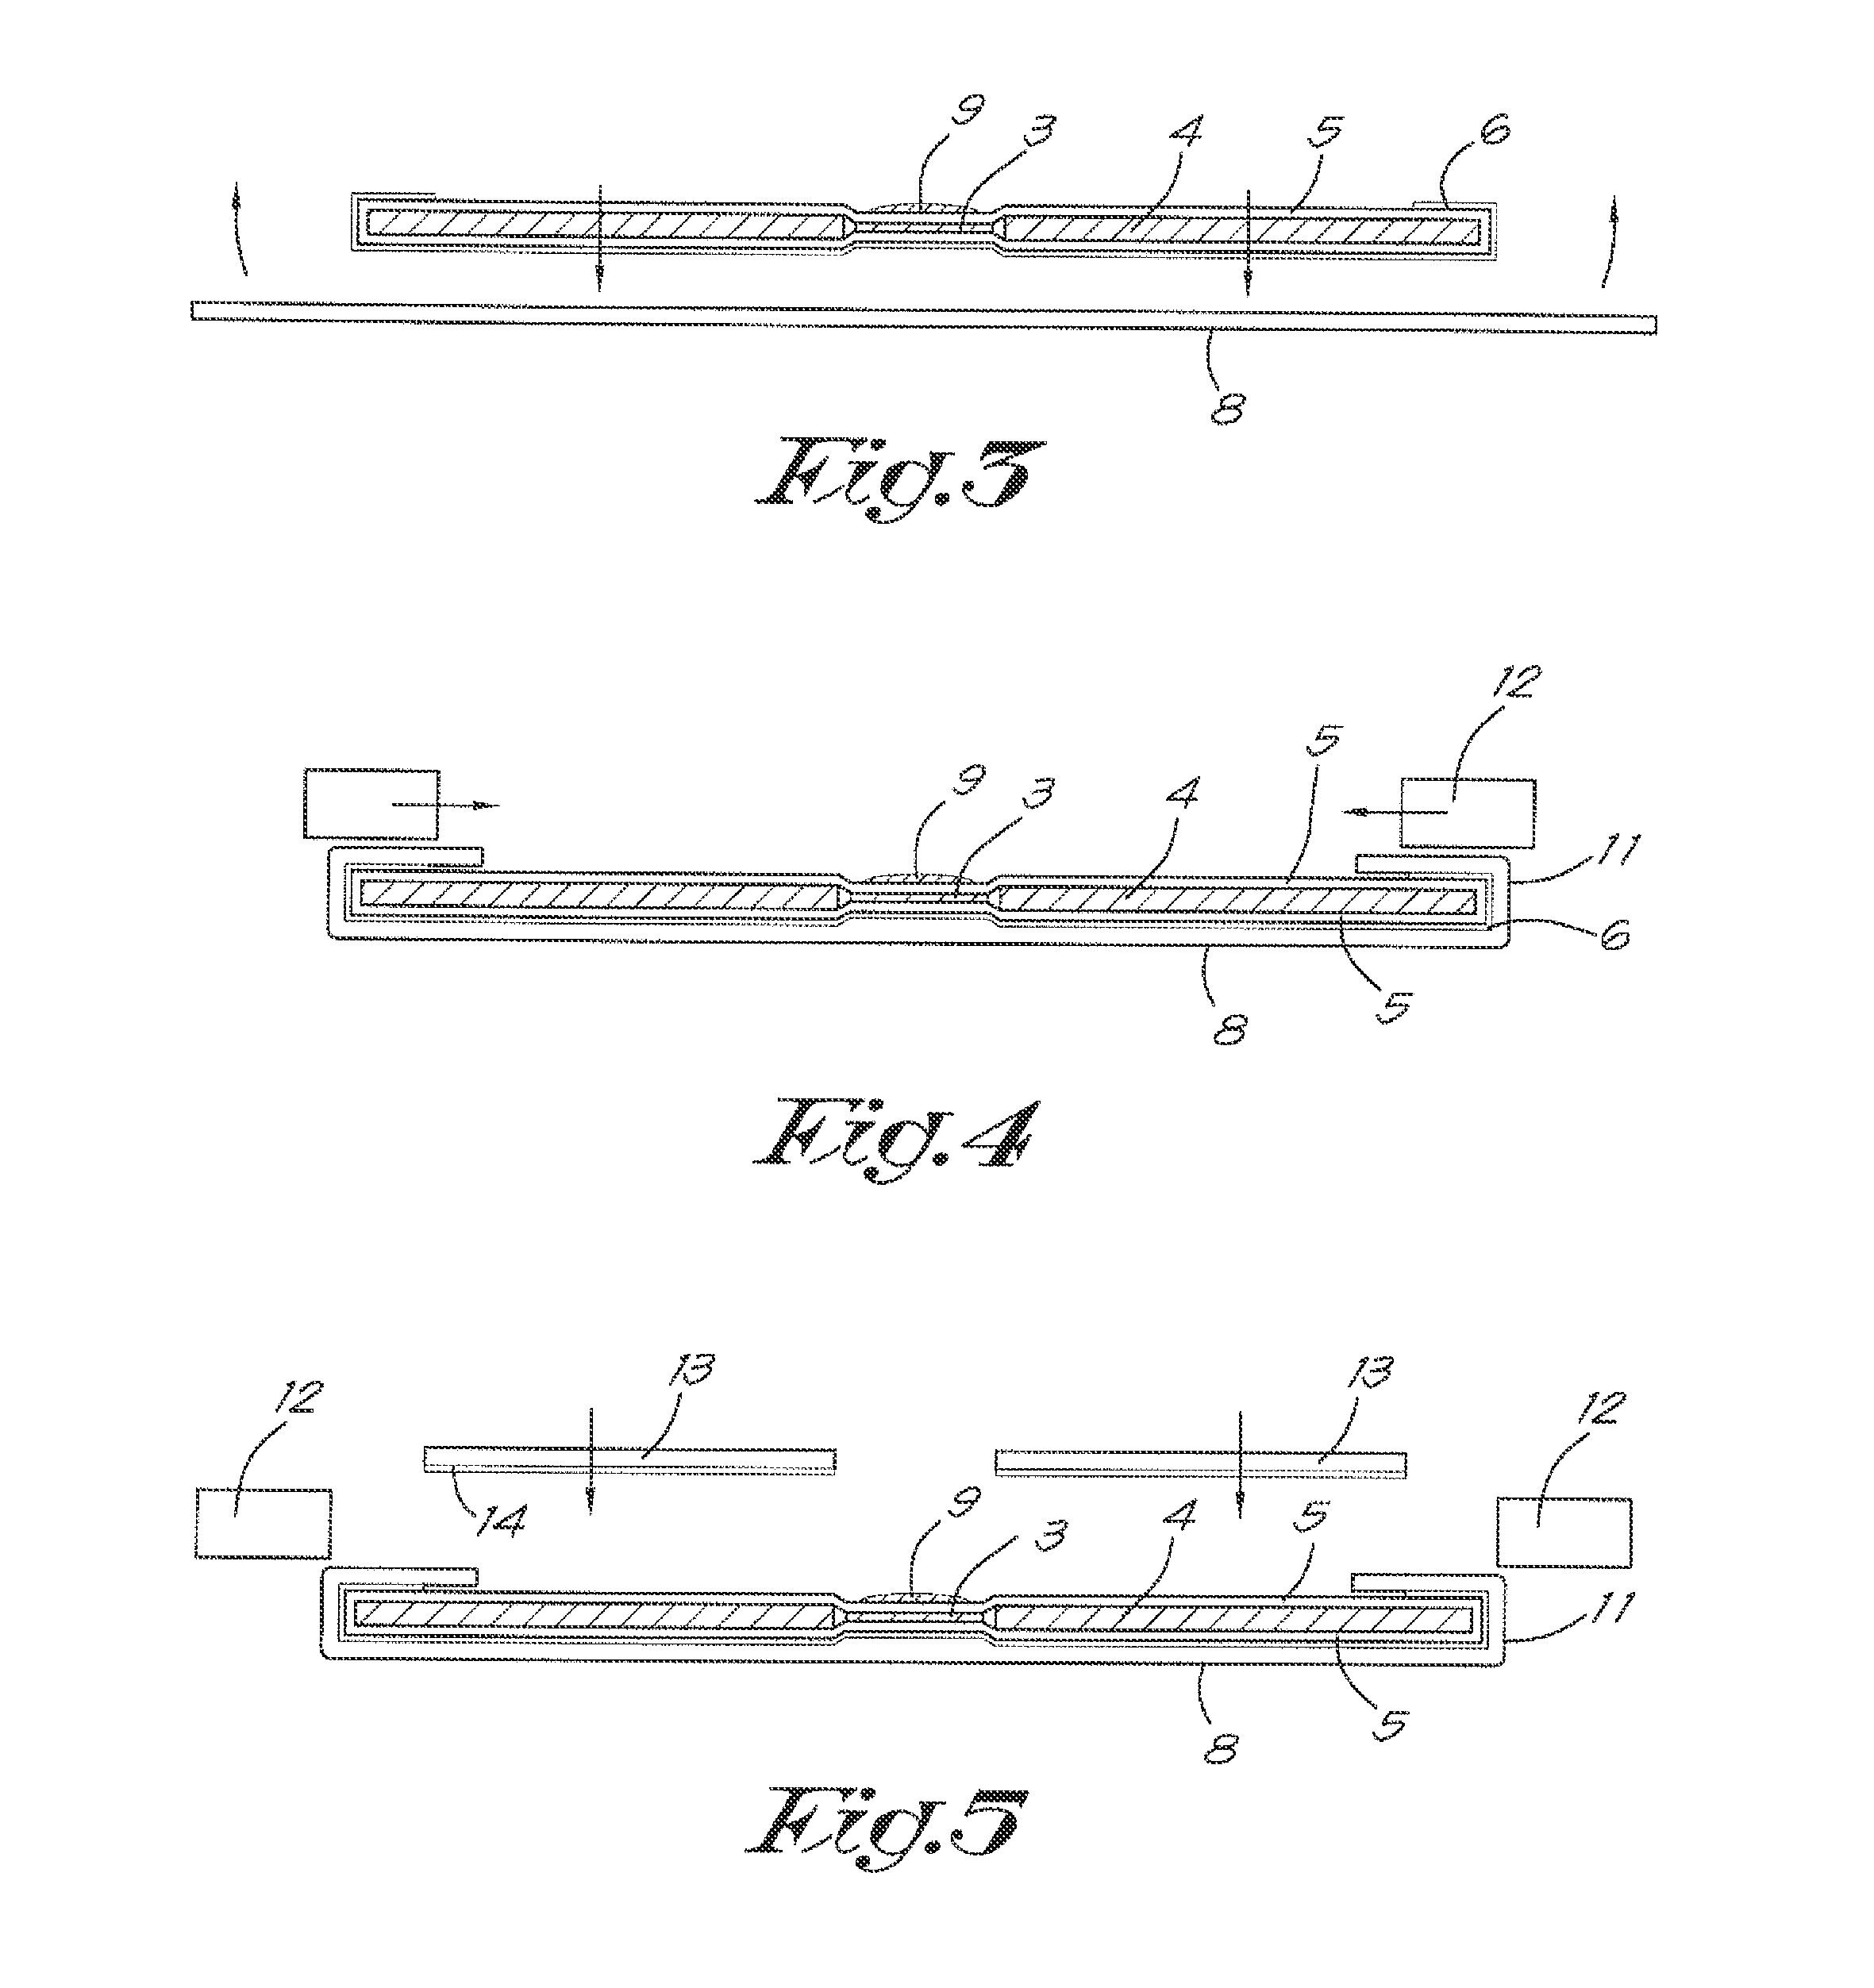 Binding element for manufacturing a binding file and method which makes use of such a binding element for manufacturing the binding file